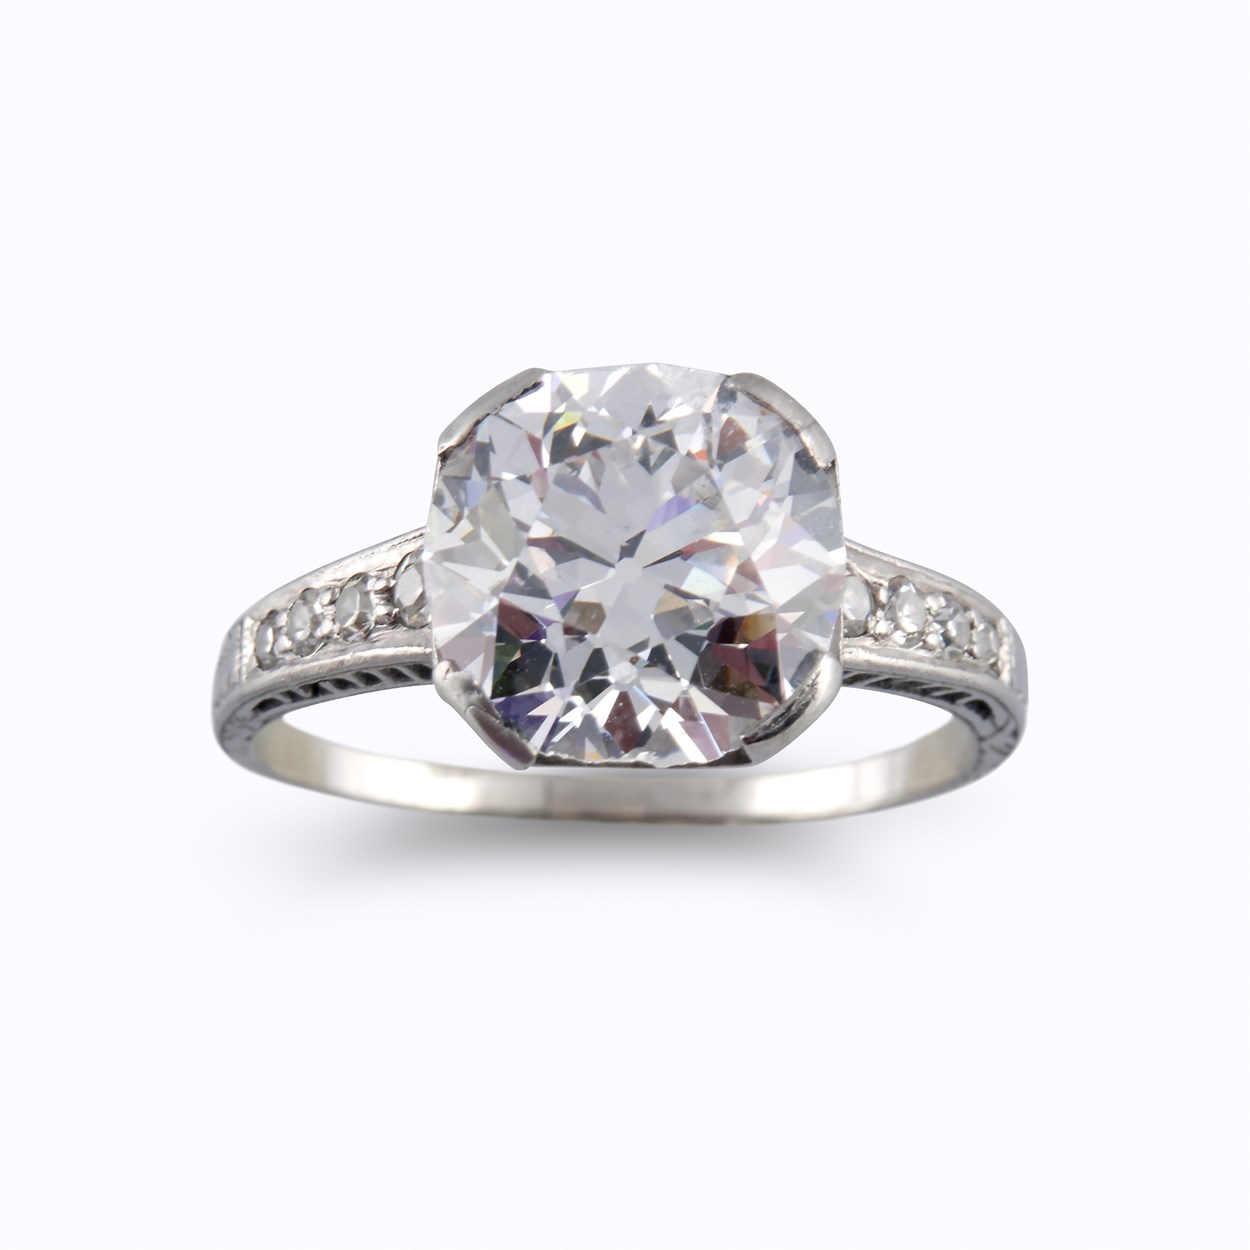 Lot 120 - A Diamond Solitaire Ring